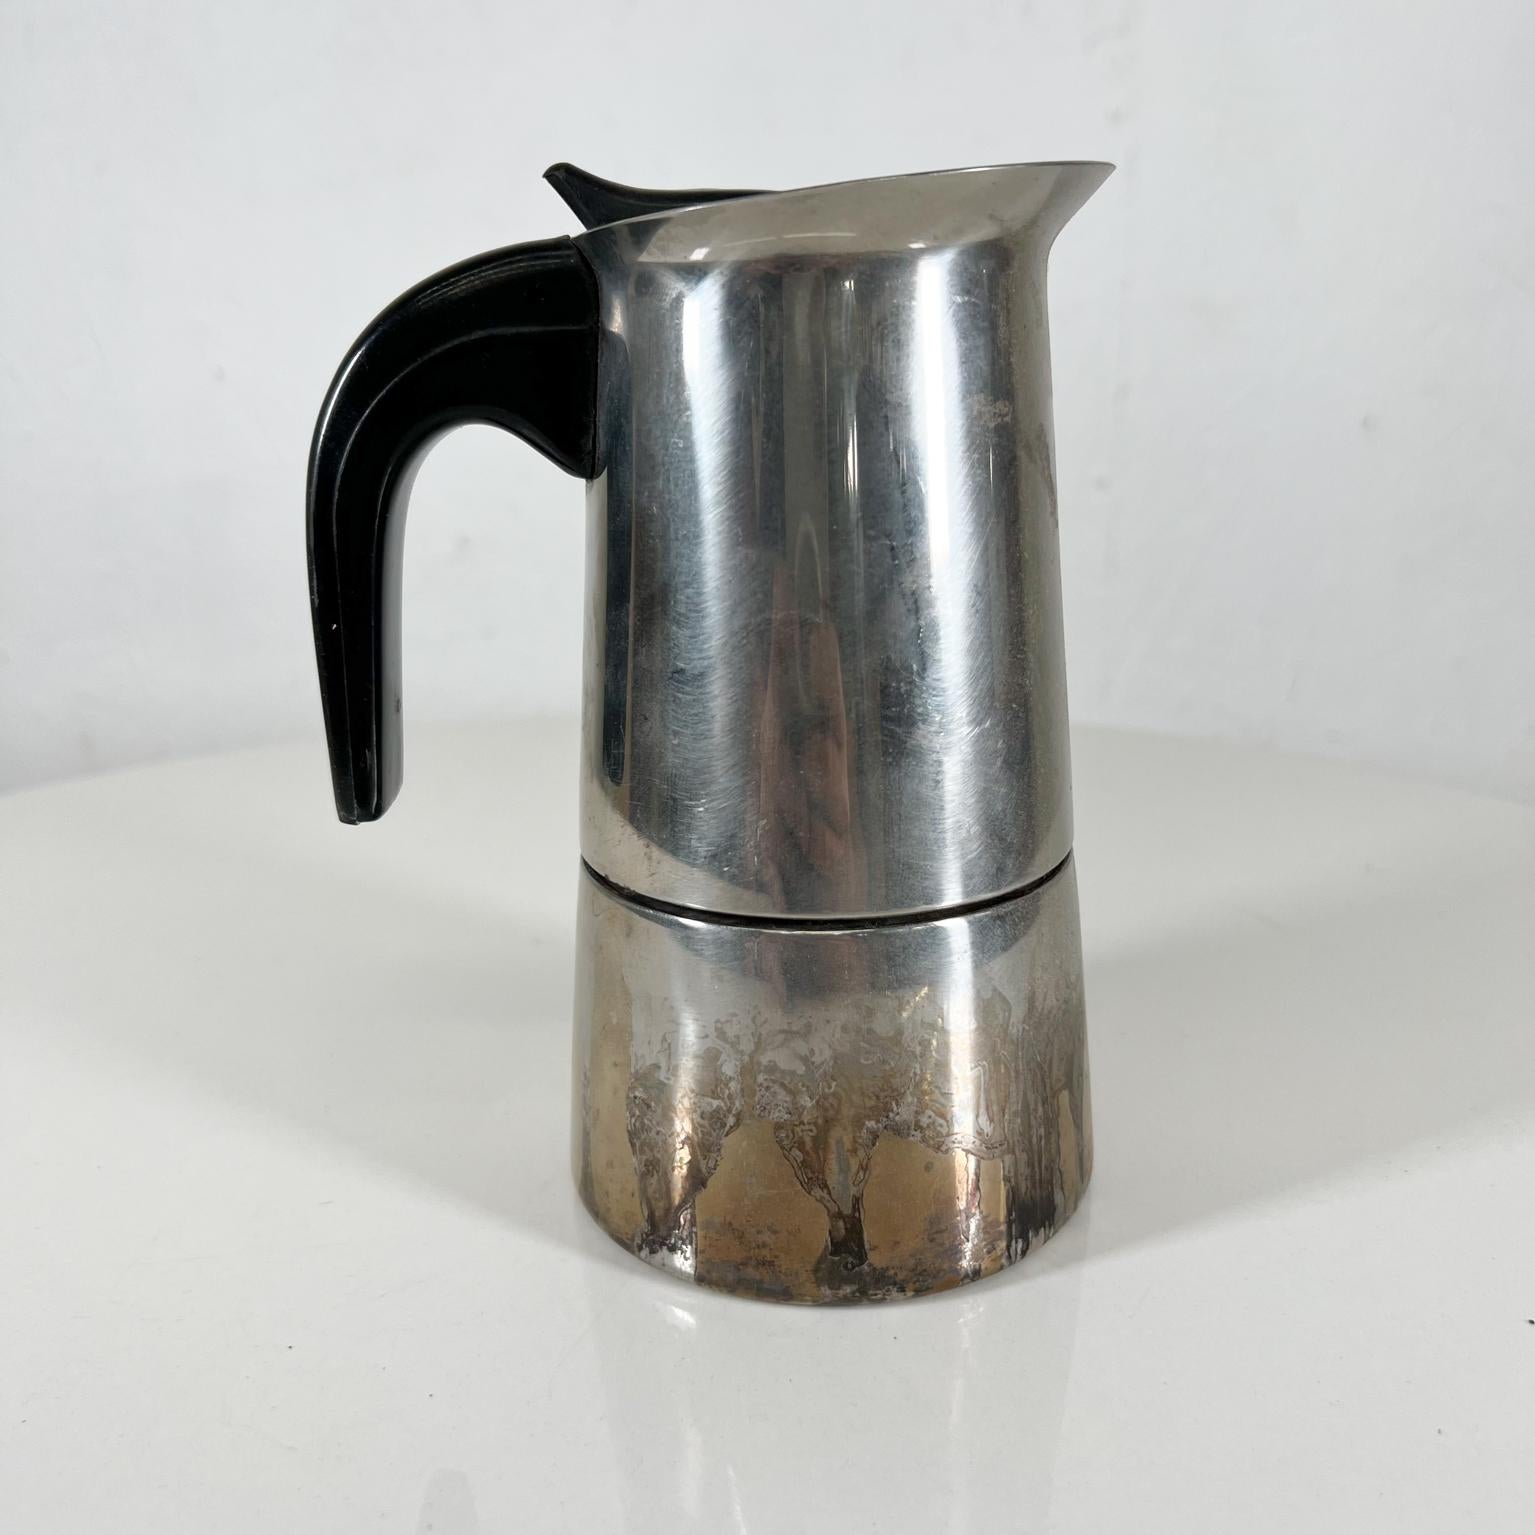 Vintage GB Guido Bergna Stovetop Moka Coffee maker espresso pot
INOX Stainless Steel
Made in Italy
6.38 tall x 3.5 diameter- 4.5 Depth
**Filter 2.38 diameter is missing
Preowned used vintage condition. Missing filter. Selling as is.
See all images